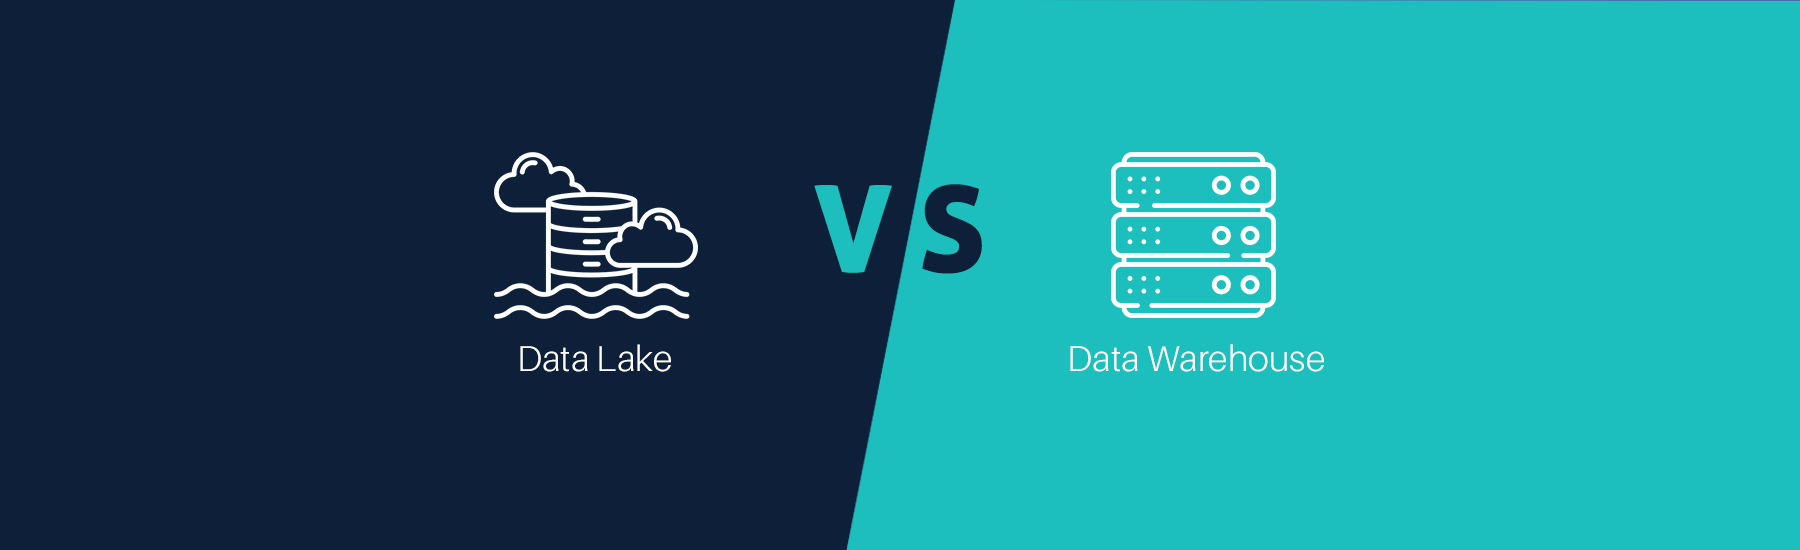 Data Lake vs. Data Warehouse: What Works Best for Your Business?